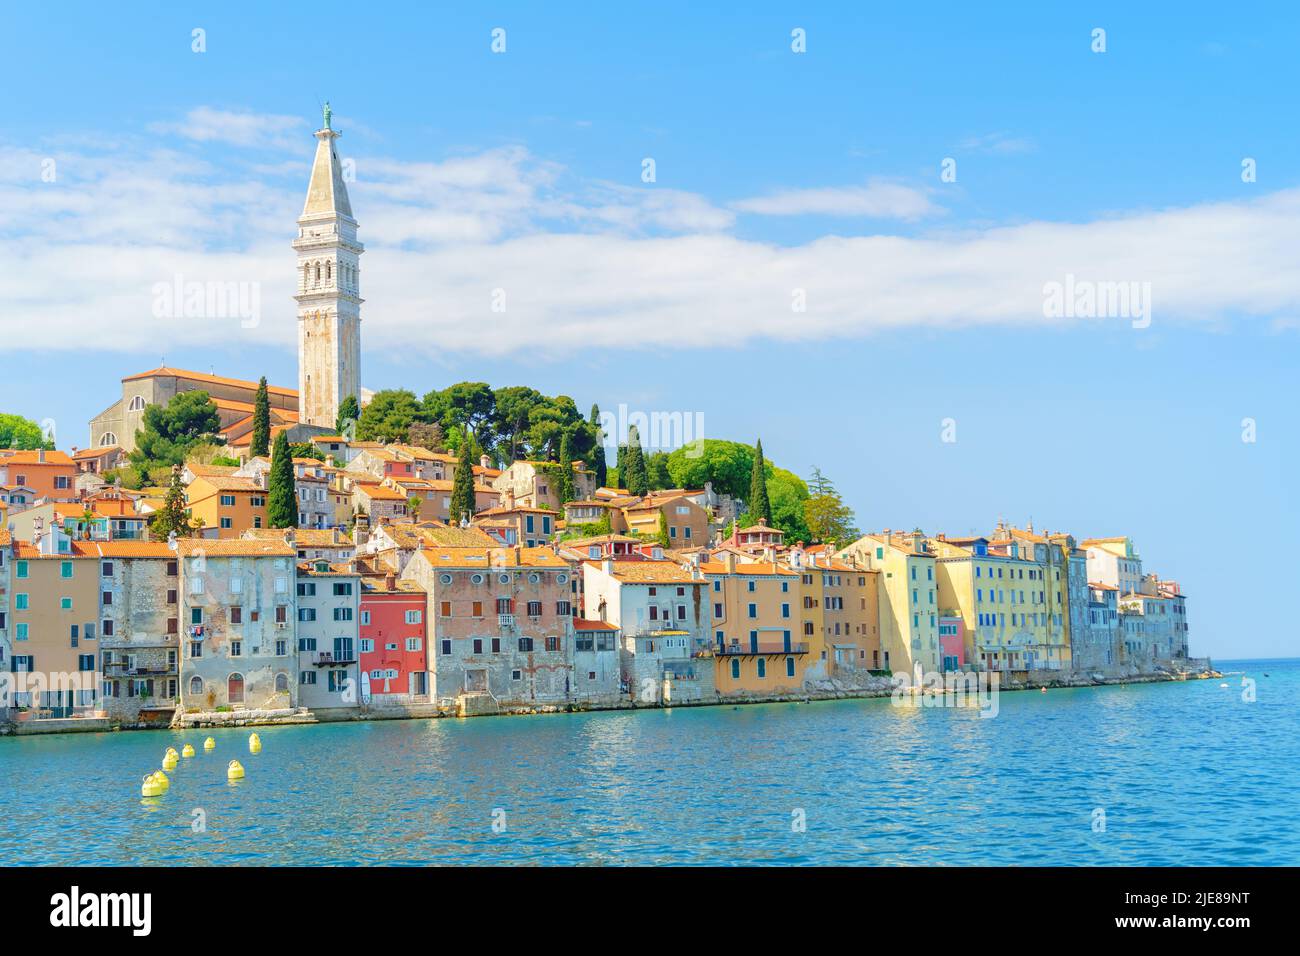 Worth seeing panoramic view of the old town of Rovinj from the sea side. Istria peninsula, Croatia Stock Photo